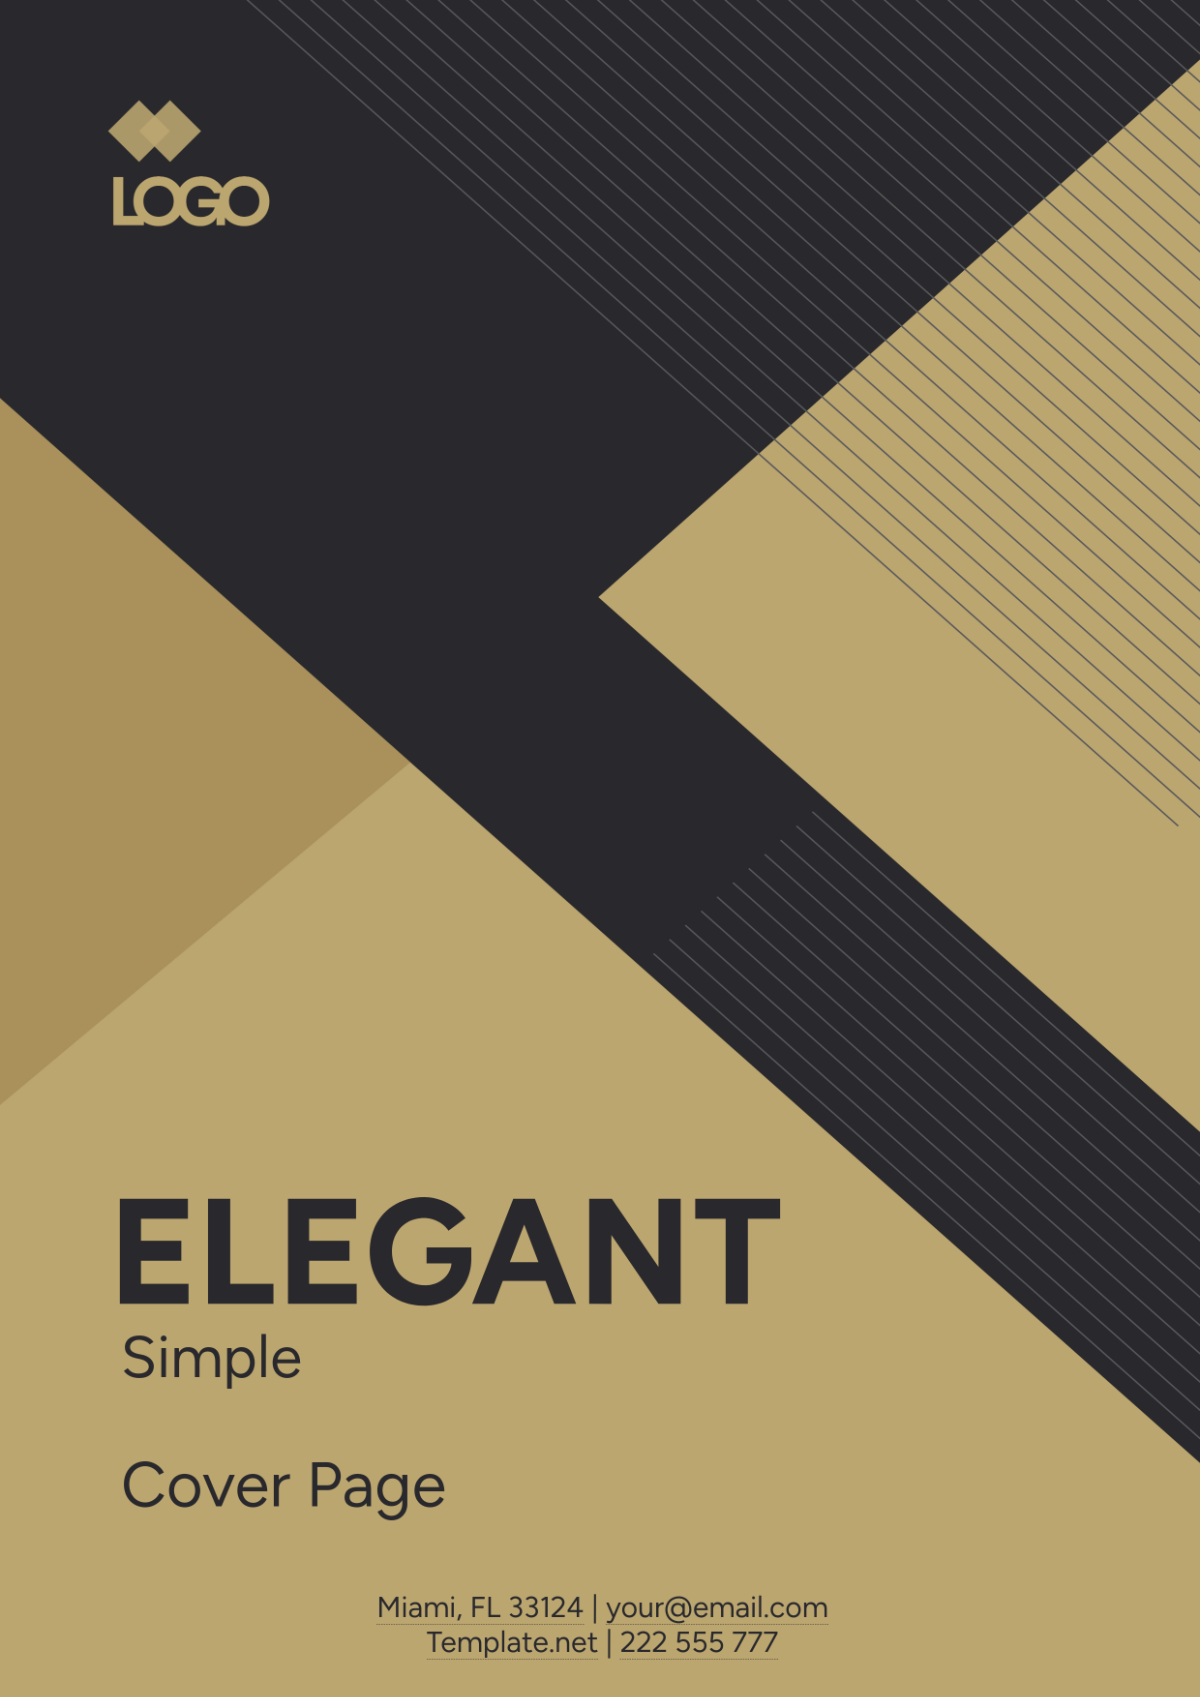 Elegant Simple Cover Page Template